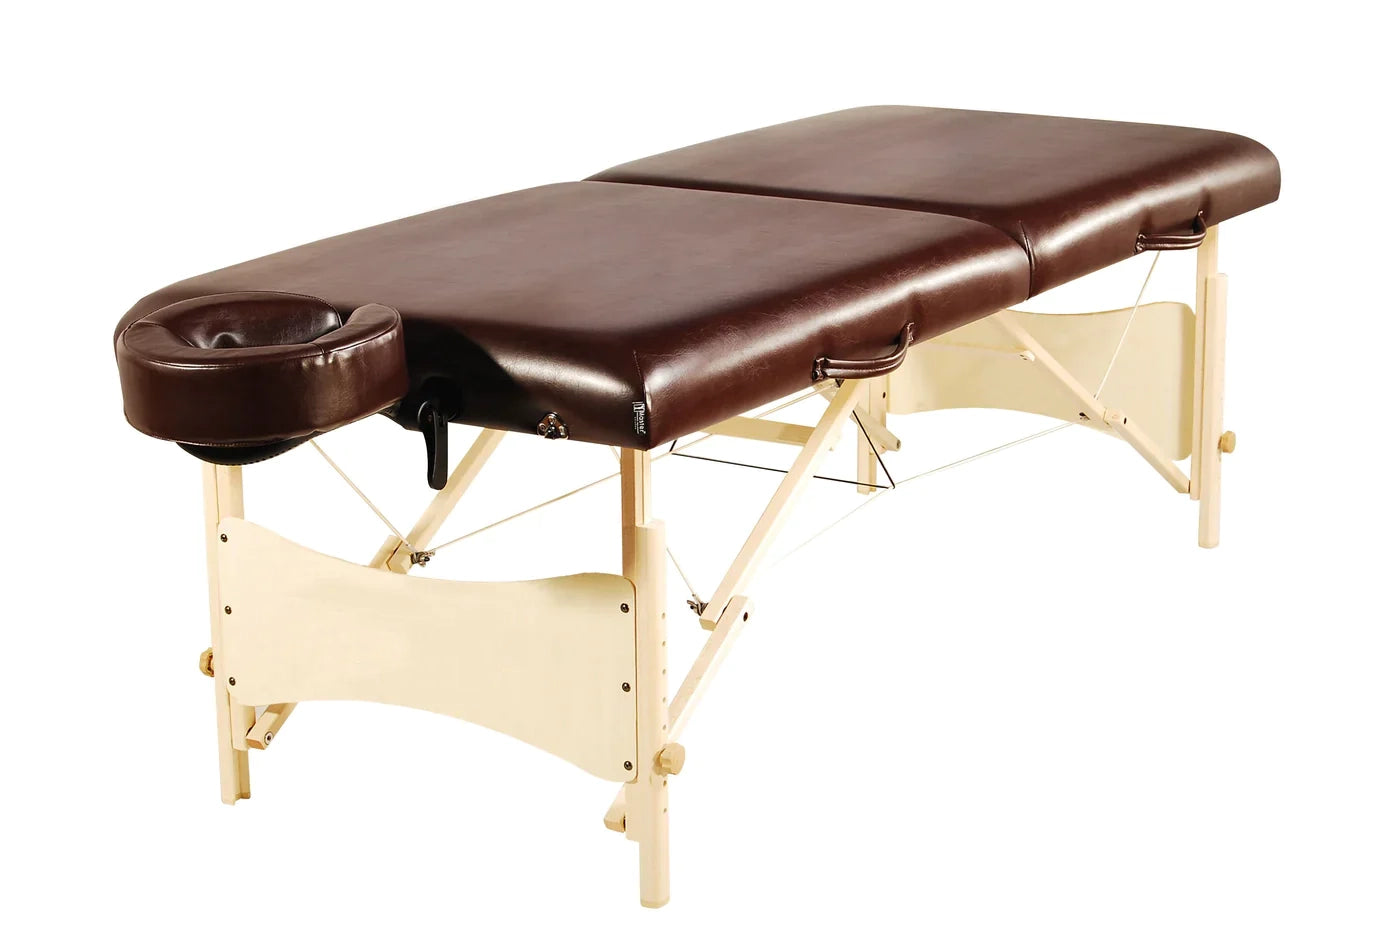 Bella2bello 30" Balboa™ Portable Massage Table NO-Frills Package with Ambient Light